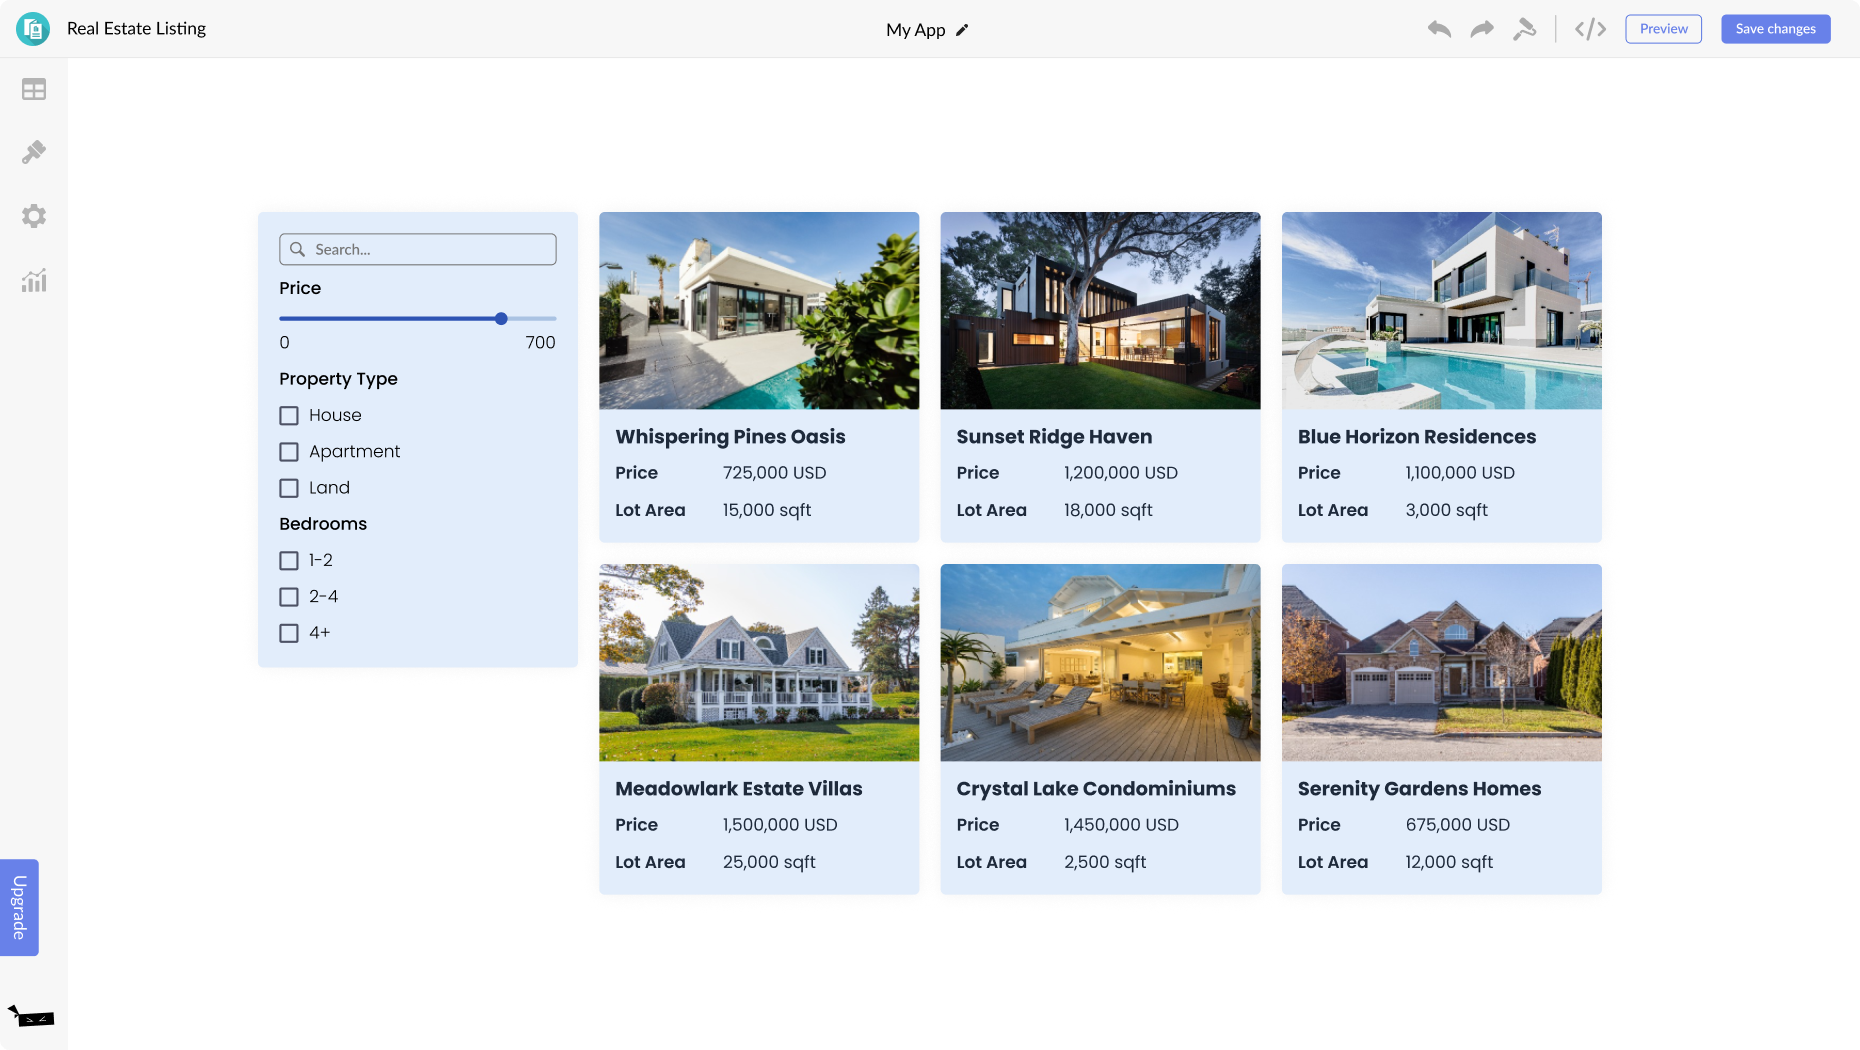 Real Estate Listings for Progress Sitefinity